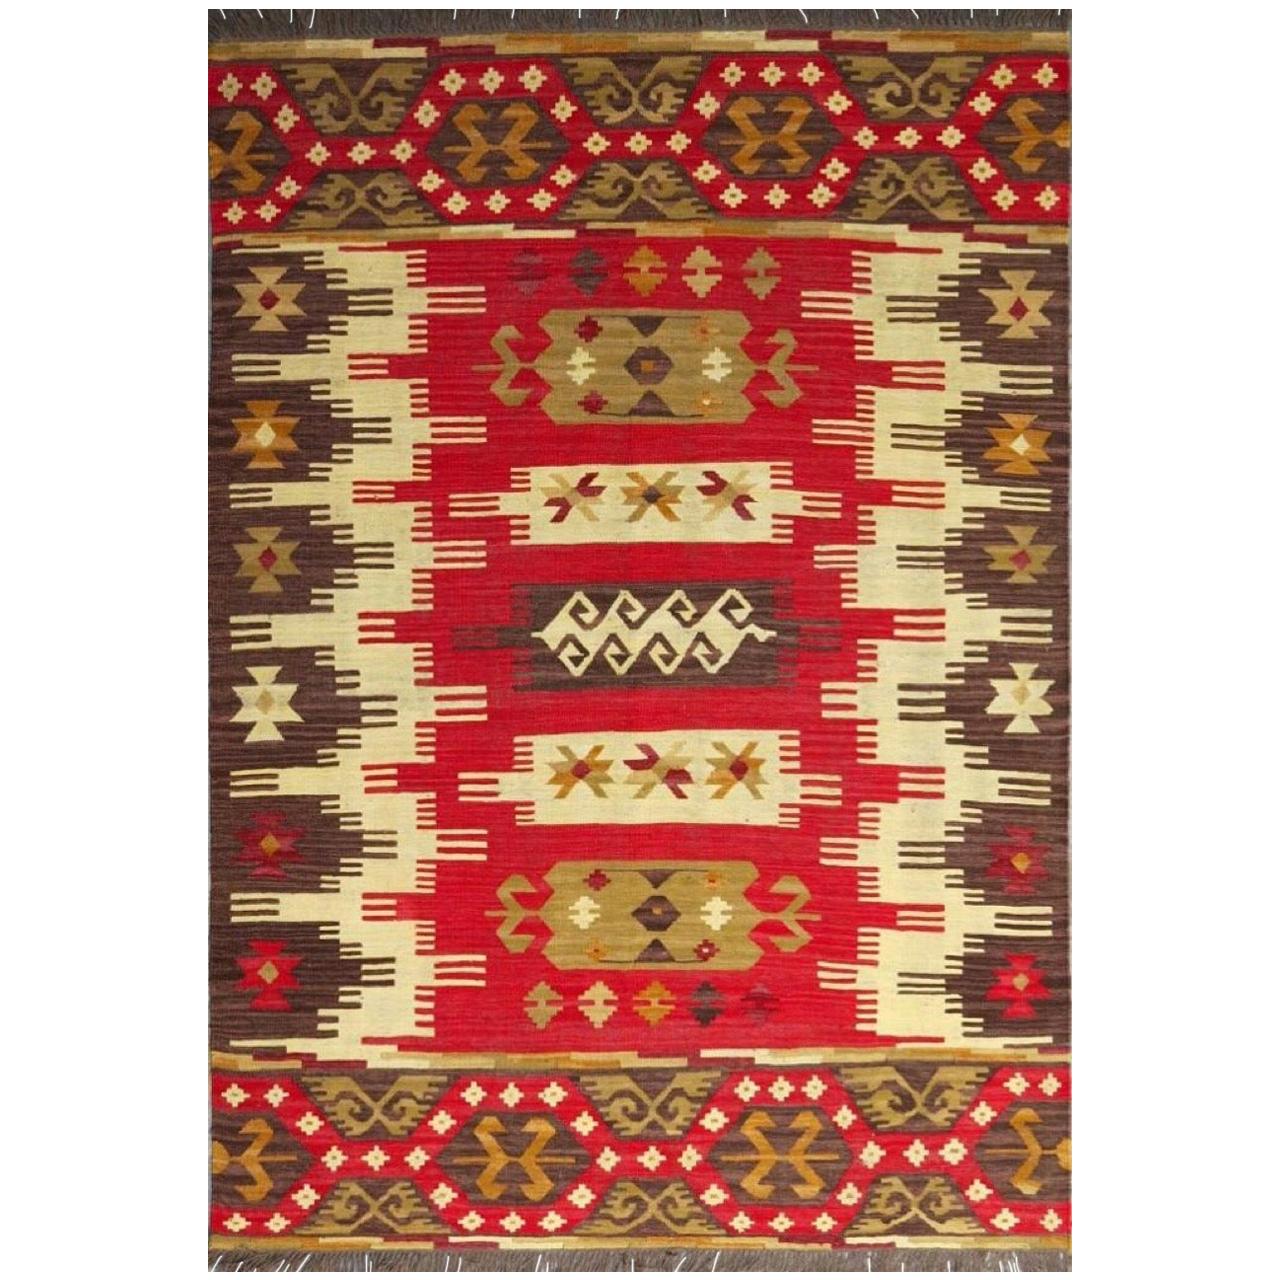 Beautiful New Anatolian Design Handwoven Kilim Rug  size 6ft 6in x 9ft 10in